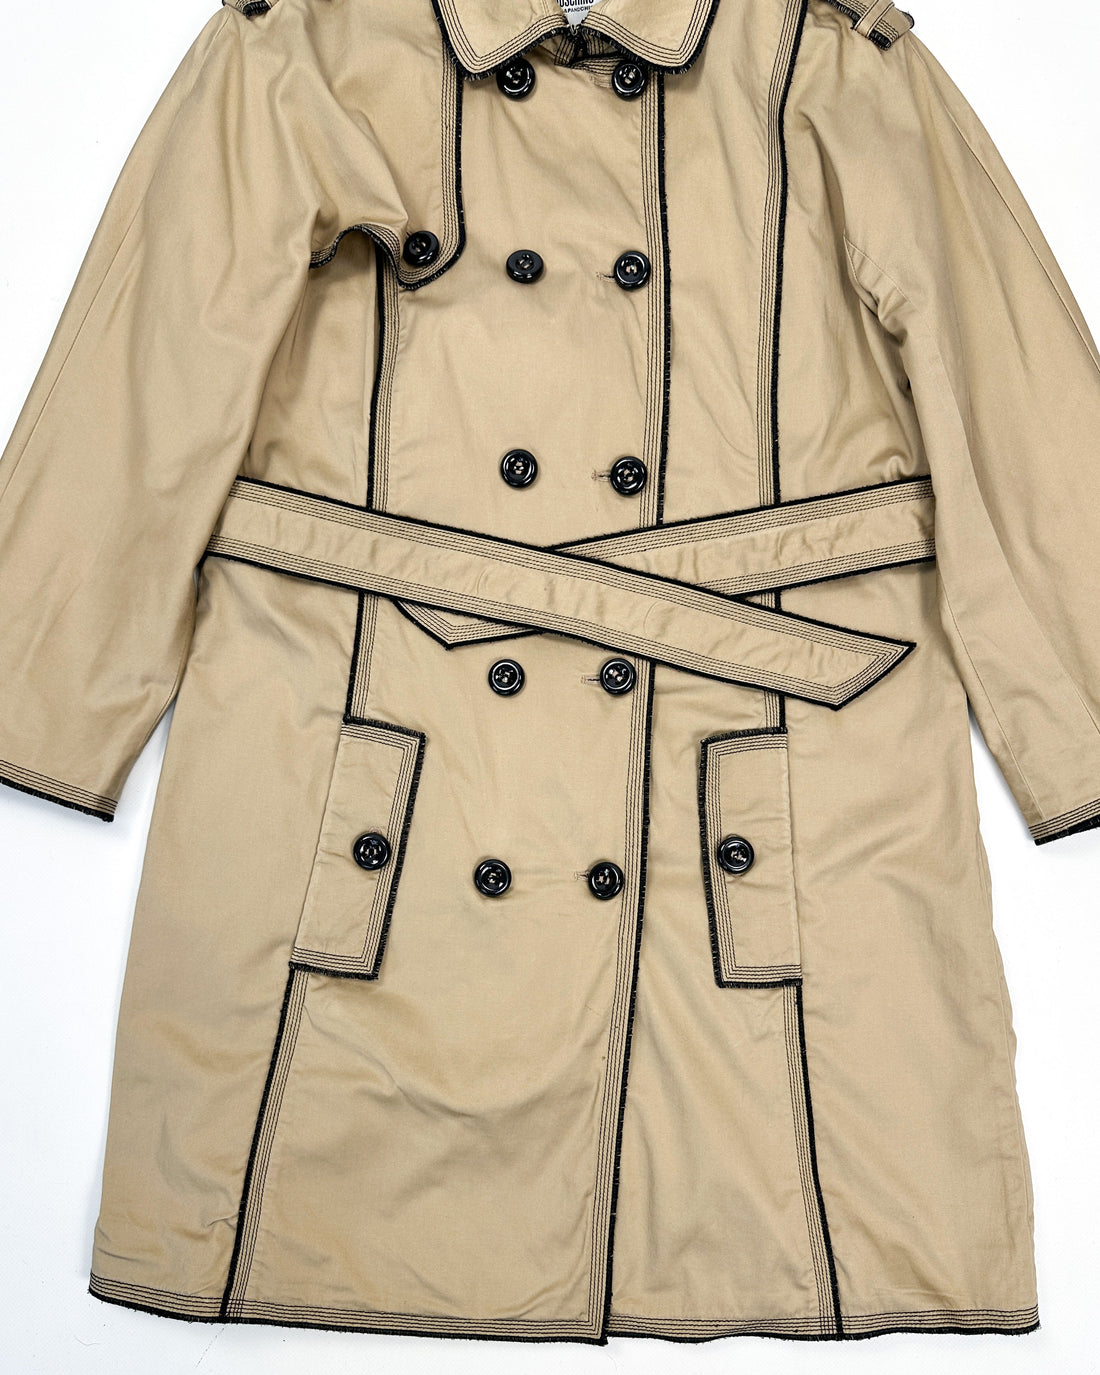 Moschino Buttoned Camel Trench Coat 1990's